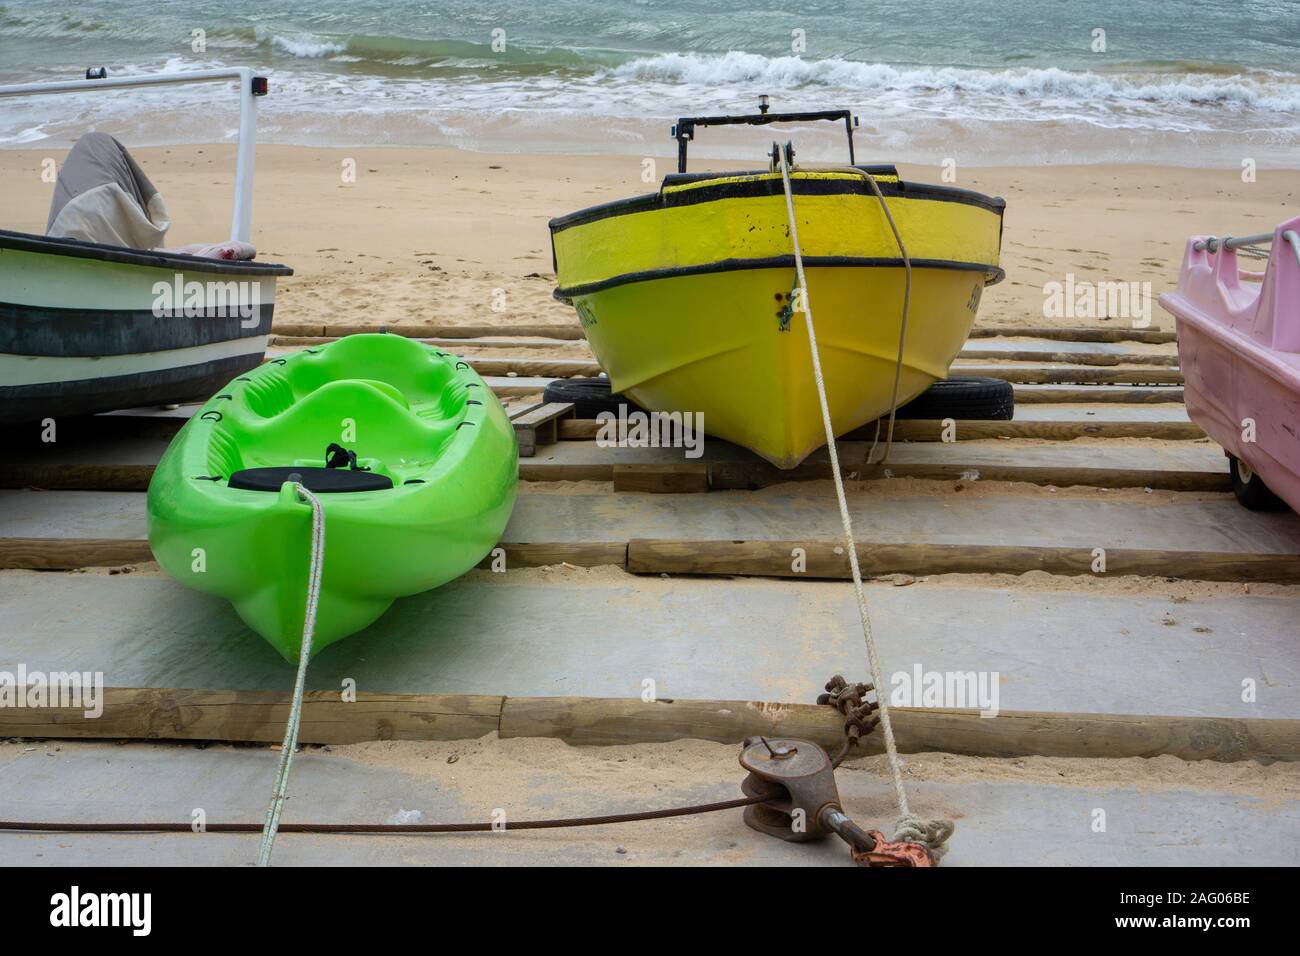 Olhos de Agua, Portugal. Small  boats  tied up at Olhos de Agua in Portugal. , the Algarve fishing town. Stock Photo